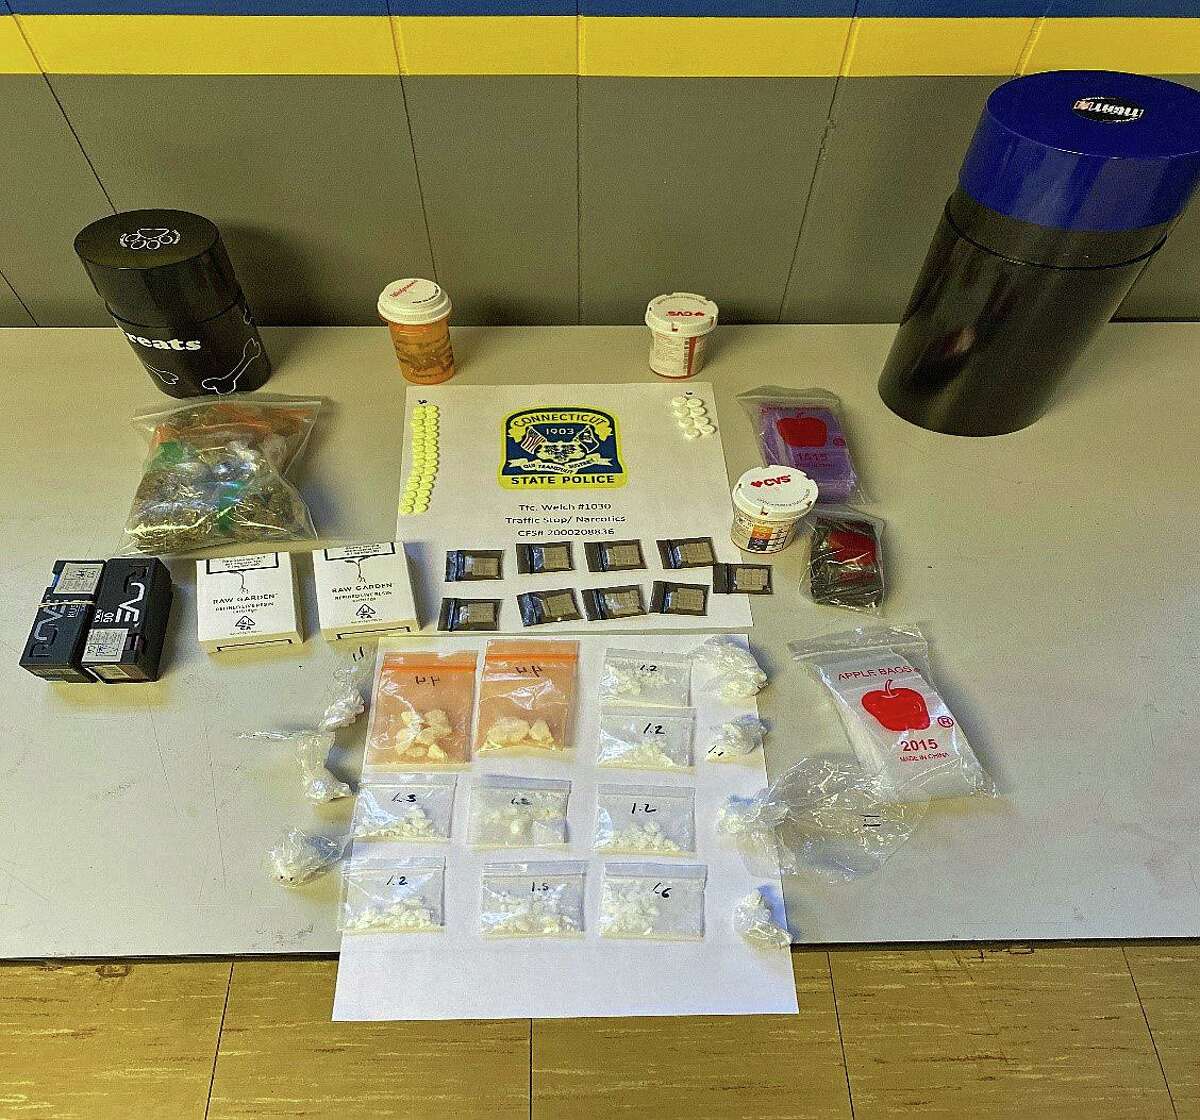 A Connecticut man, who was clocked driving at 89 mph on I-84, has been arrested after State Police found a quanity of drugs inside his vehicle. Angel Torres, of Hartford, 31, of Hartford, was found in possession of approximately 26.9 grams of cocaine, 1.6 ounces of marijuana, 45 Alprazolam pills and 30 Clonazepam pills.